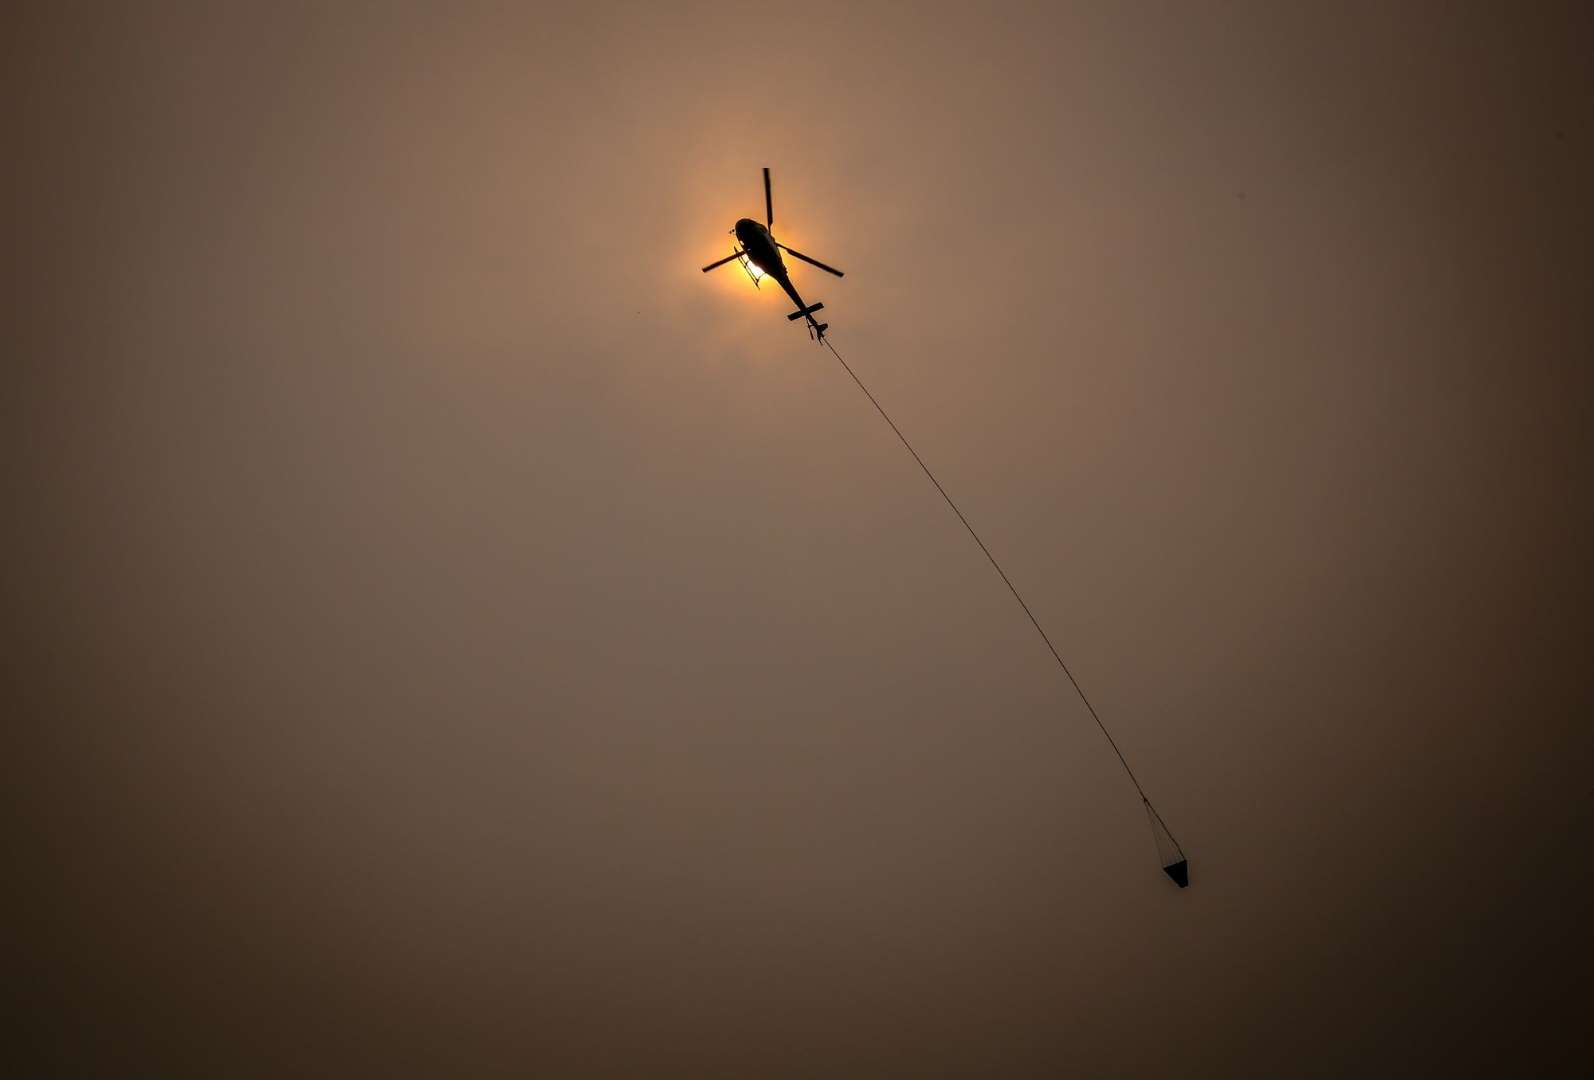 A helicopter carries water through smoky skies as it flies near the town of Bilpin, located west of Sydney in New South Wales, Australia, on Sunday, 29 December 2019. Photo: Bloomberg